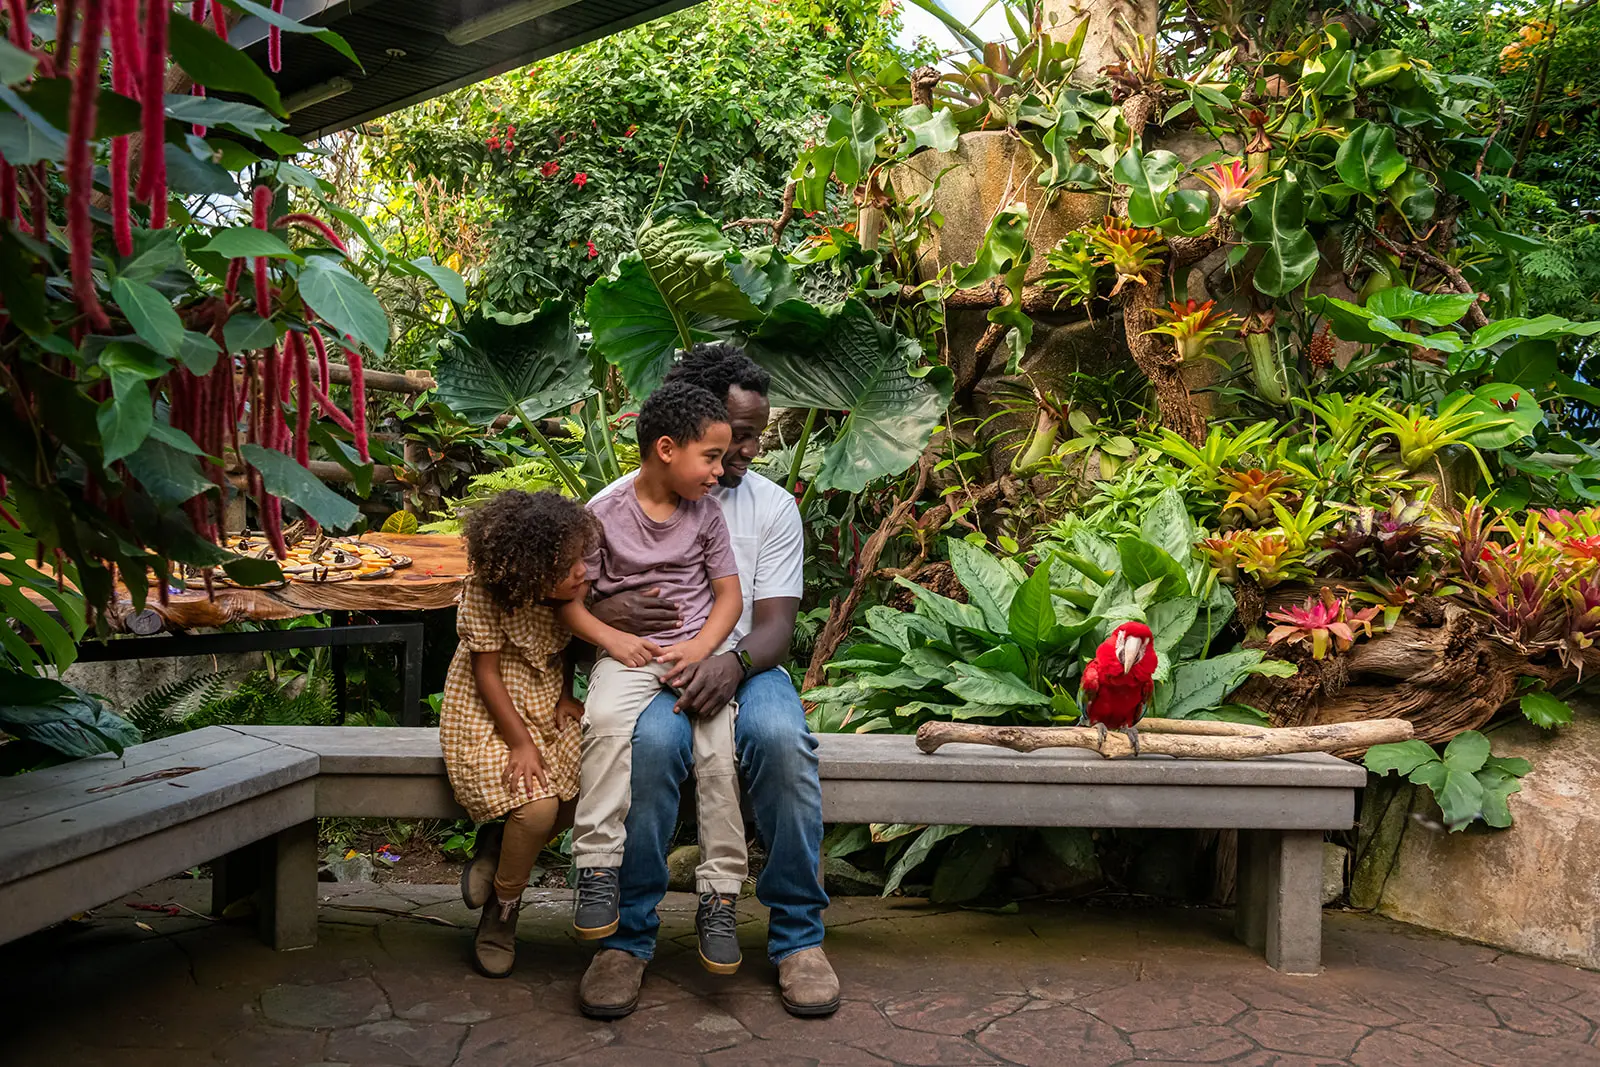 A family explores the Victoria Butterfly Gardens, spotting a parrot